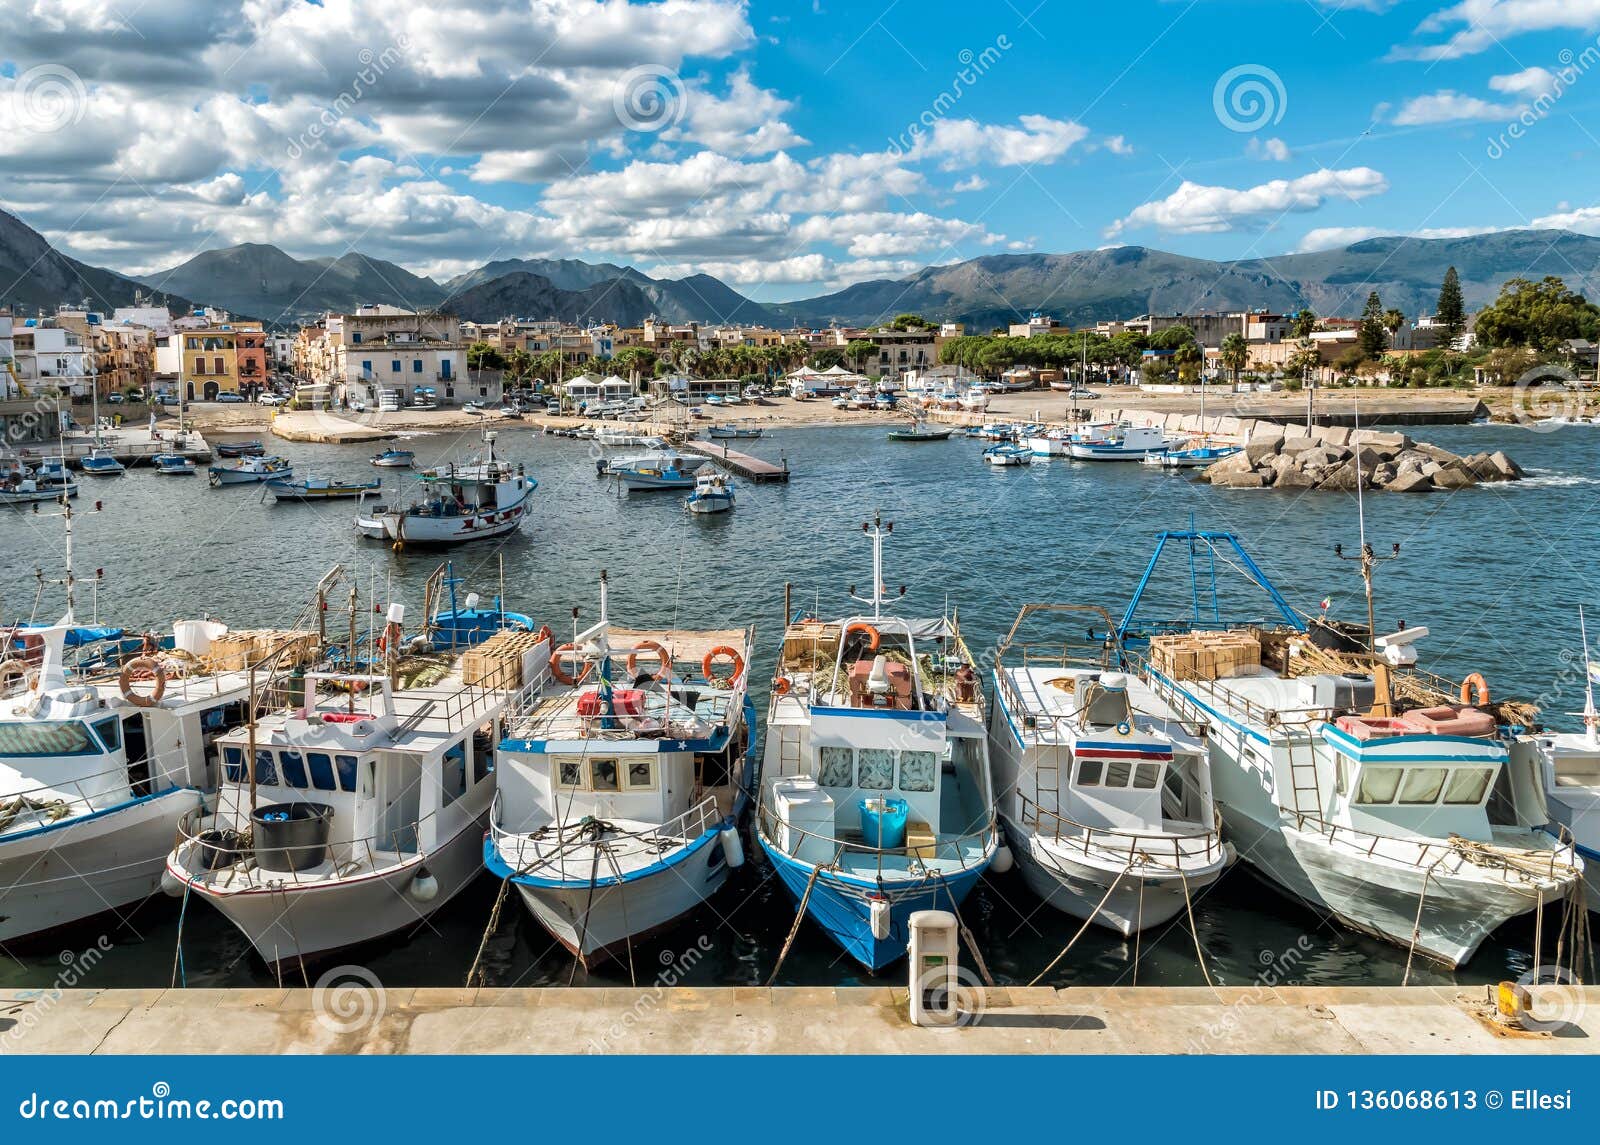 fishing boats in the small harbor of isola delle femmine, sicily